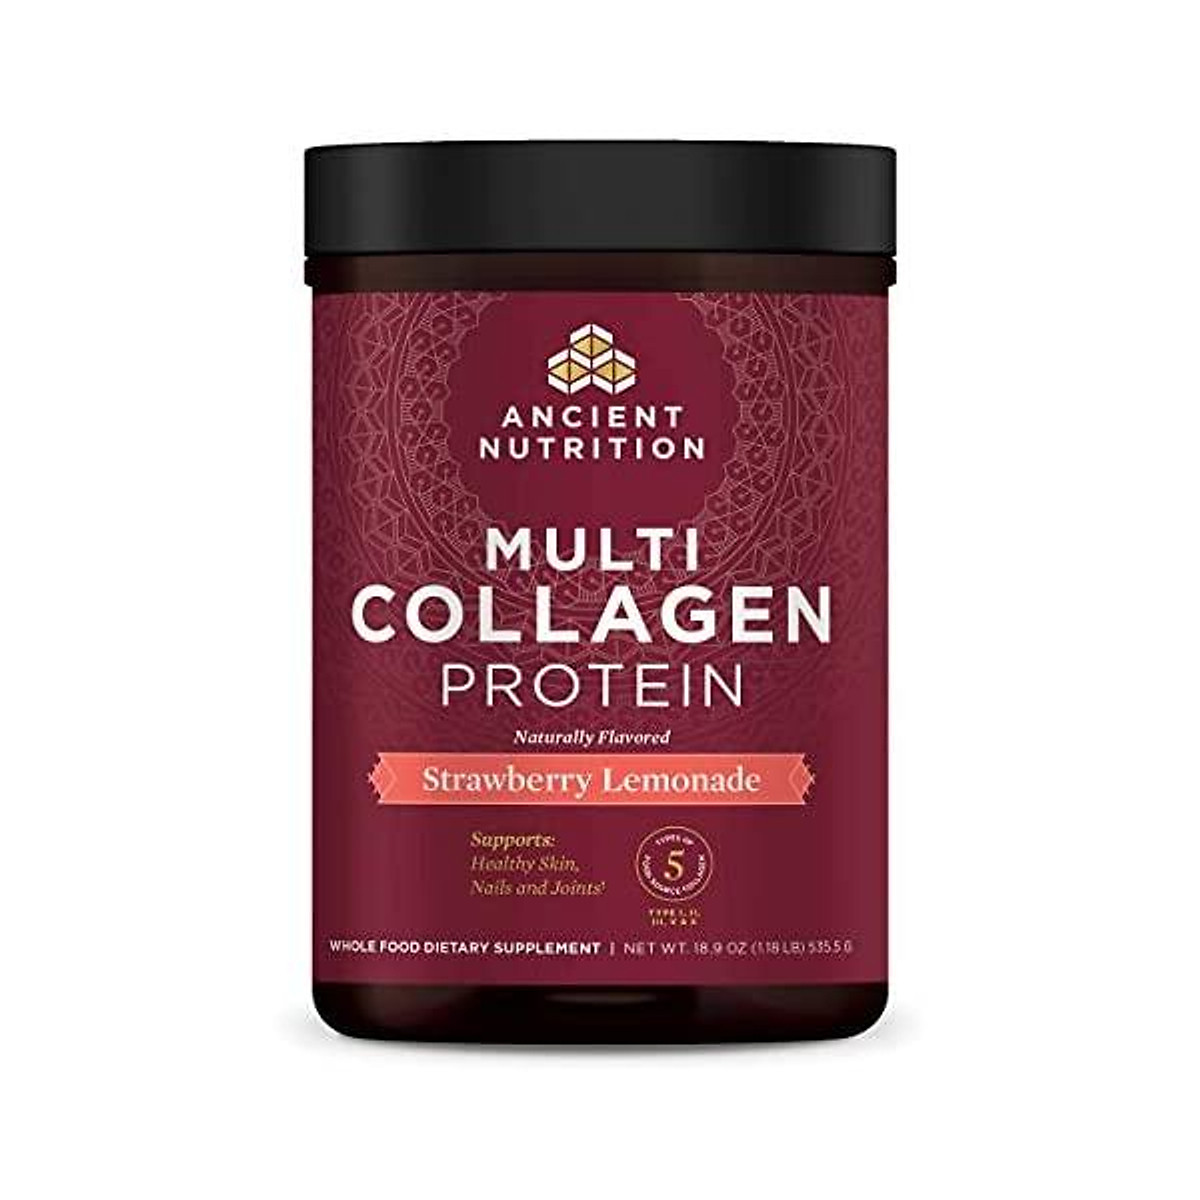 Mua Ancient Nutrition Multi Collagen Protein Powder, Strawberry Lemonade,  Formulated by Dr. Josh Axe, Hydrolyzed Collagen Supplement Supports Joints,  Hair, Skin and Gut Health, 